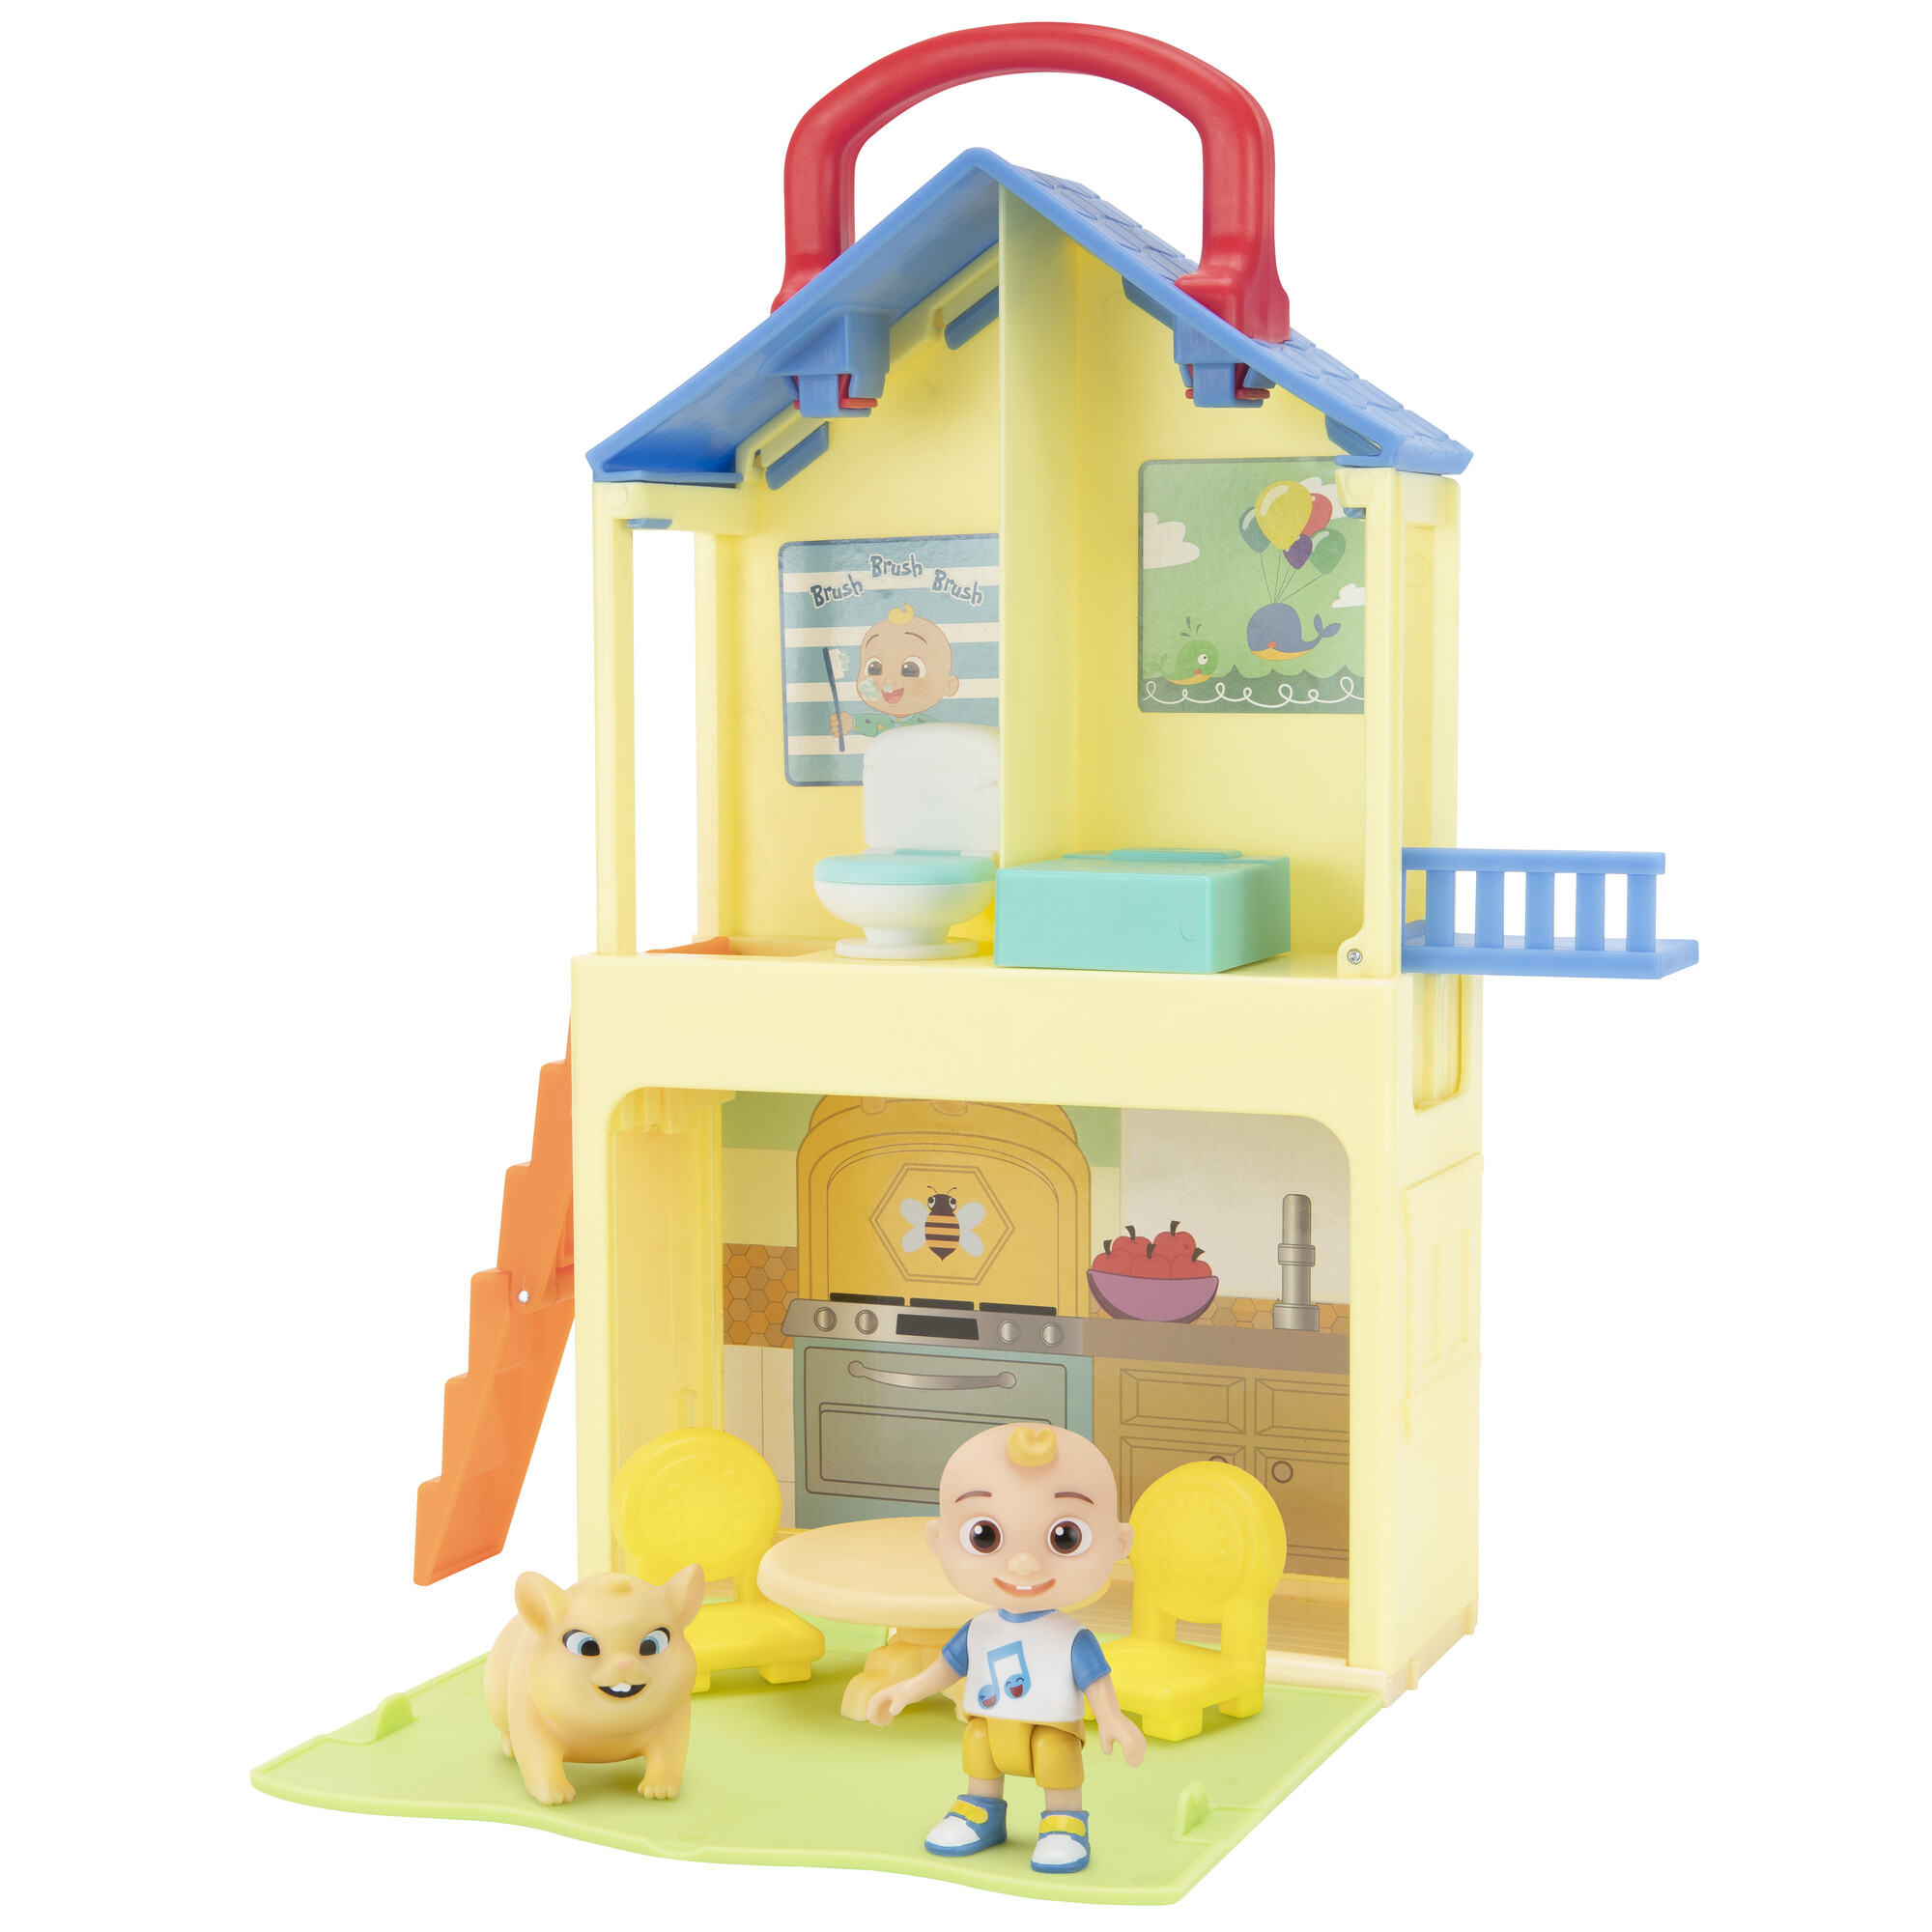 CoComelon's Pop n' Play House - Transforming Playset - image 1 of 10